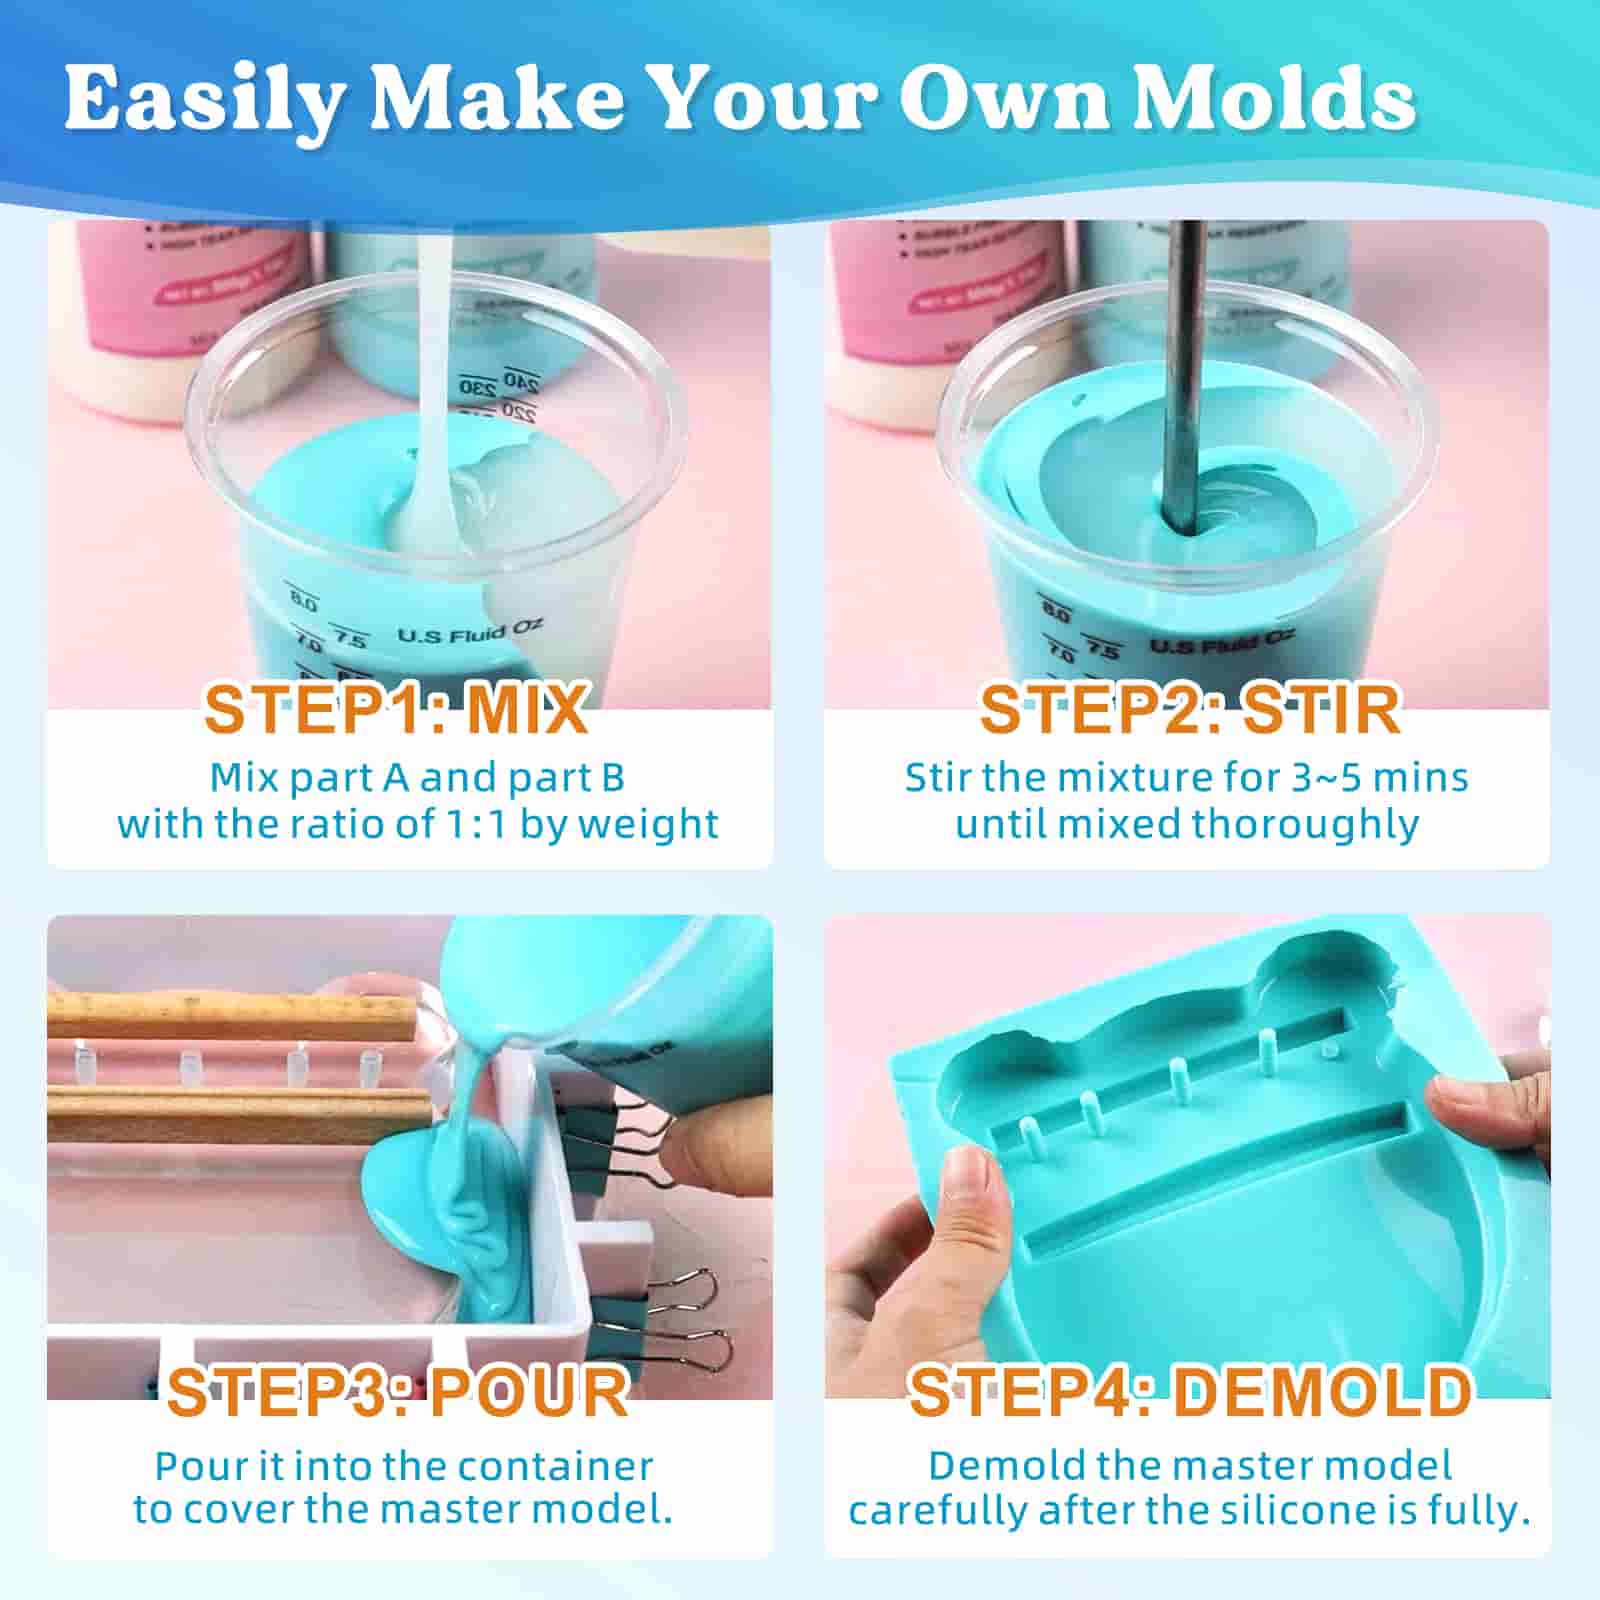 LET'S RESIN Silicone Mold Making Kit, 30A Liquid Silicone Rubber, 32 oz  Non-Toxic, Odorless - 1:1 Mixing Ratio Silicone for DIY Resin Mold,  Casting, Candle Maki…